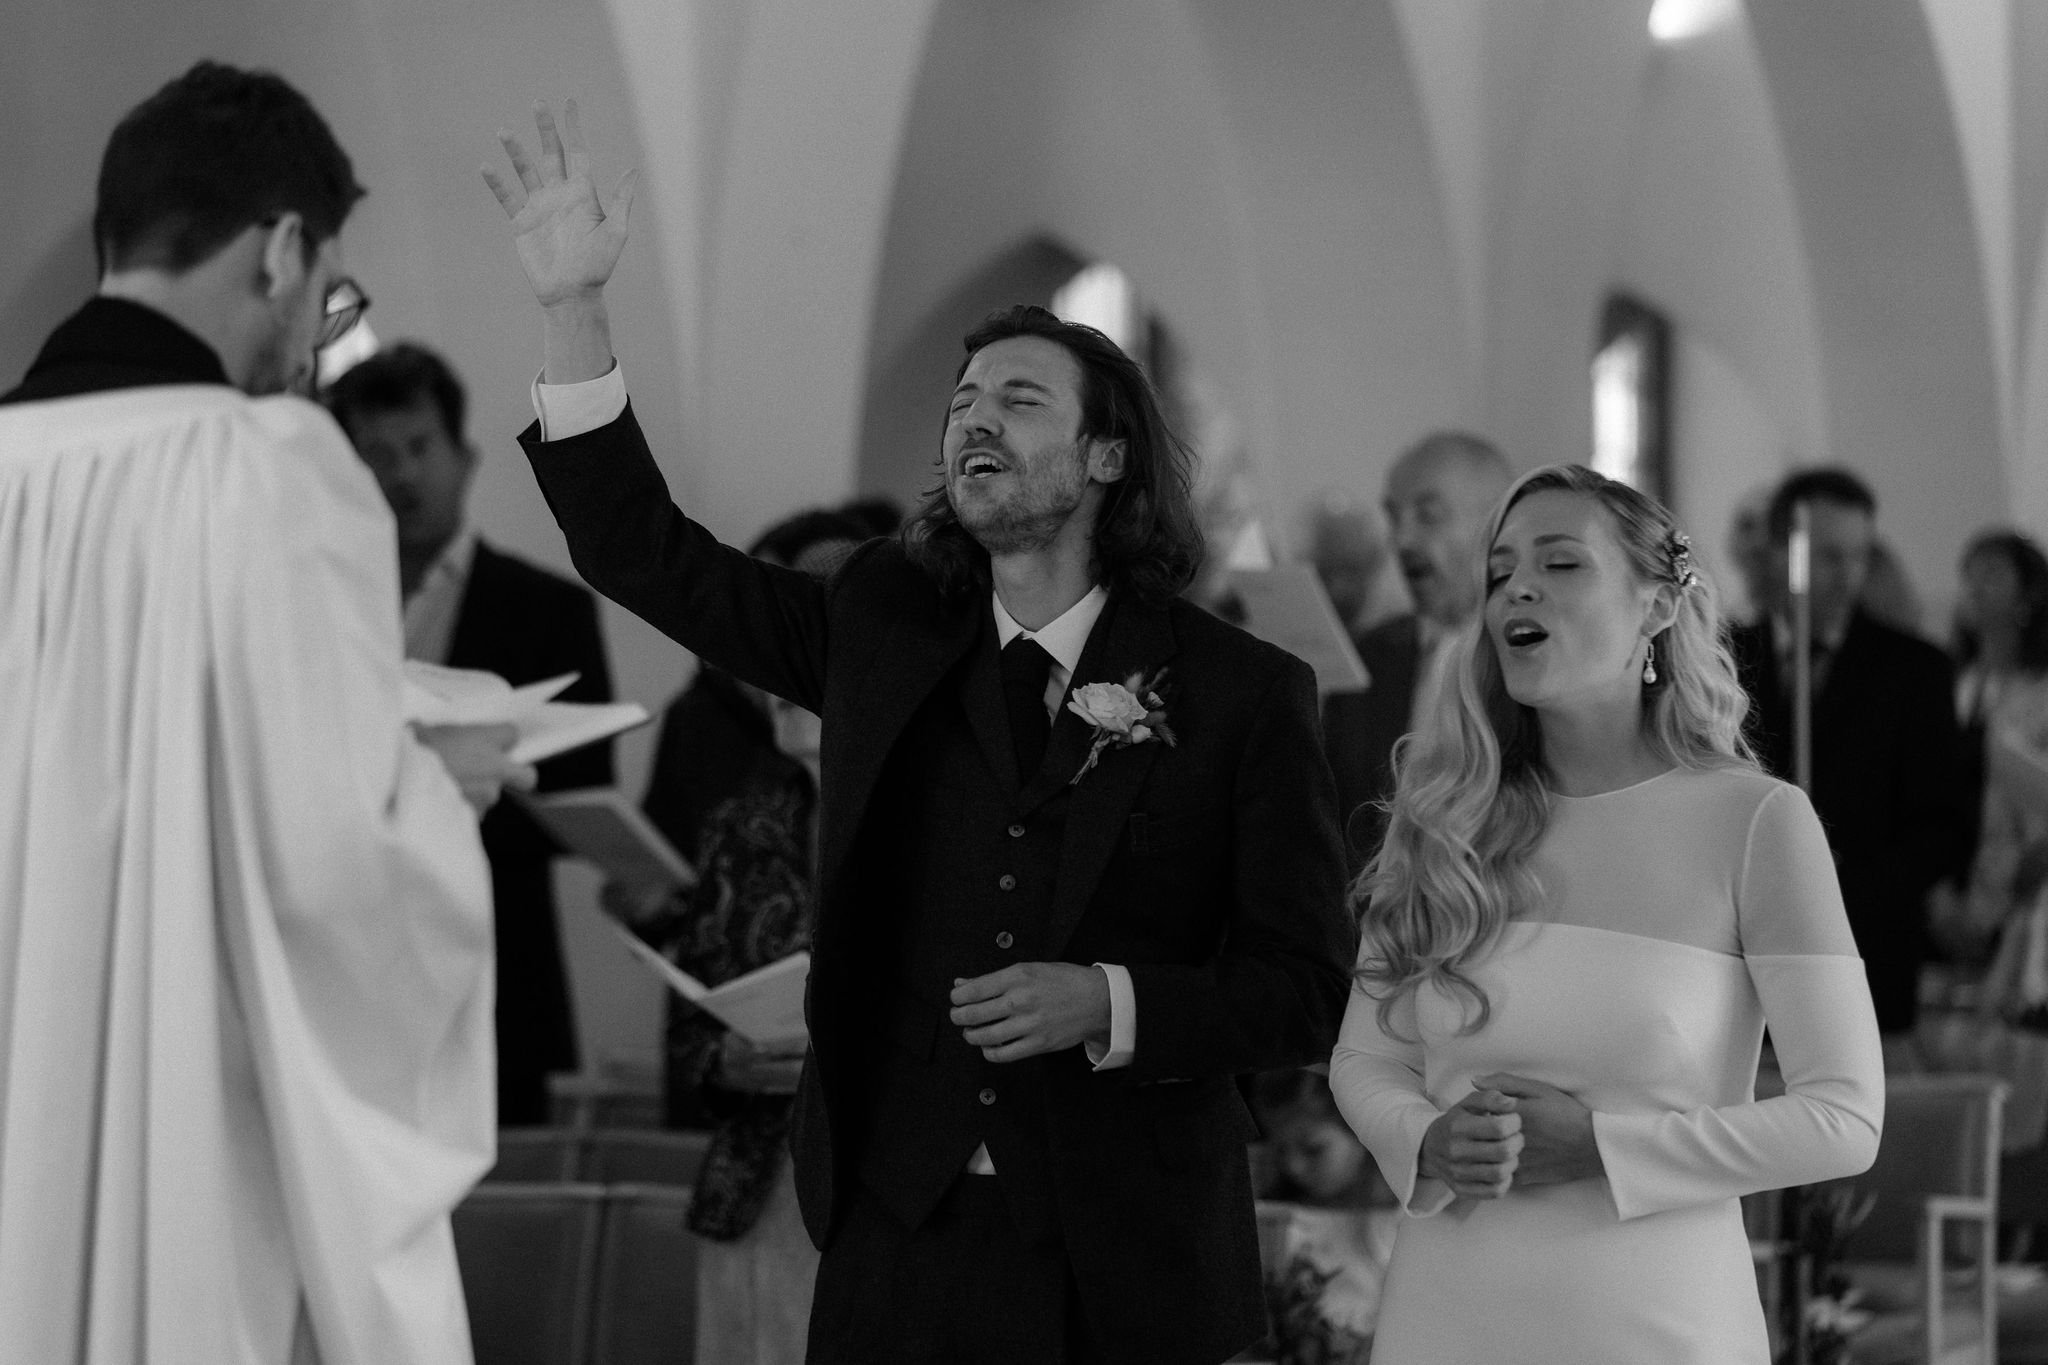 Bride and groom singing and praising god at alter